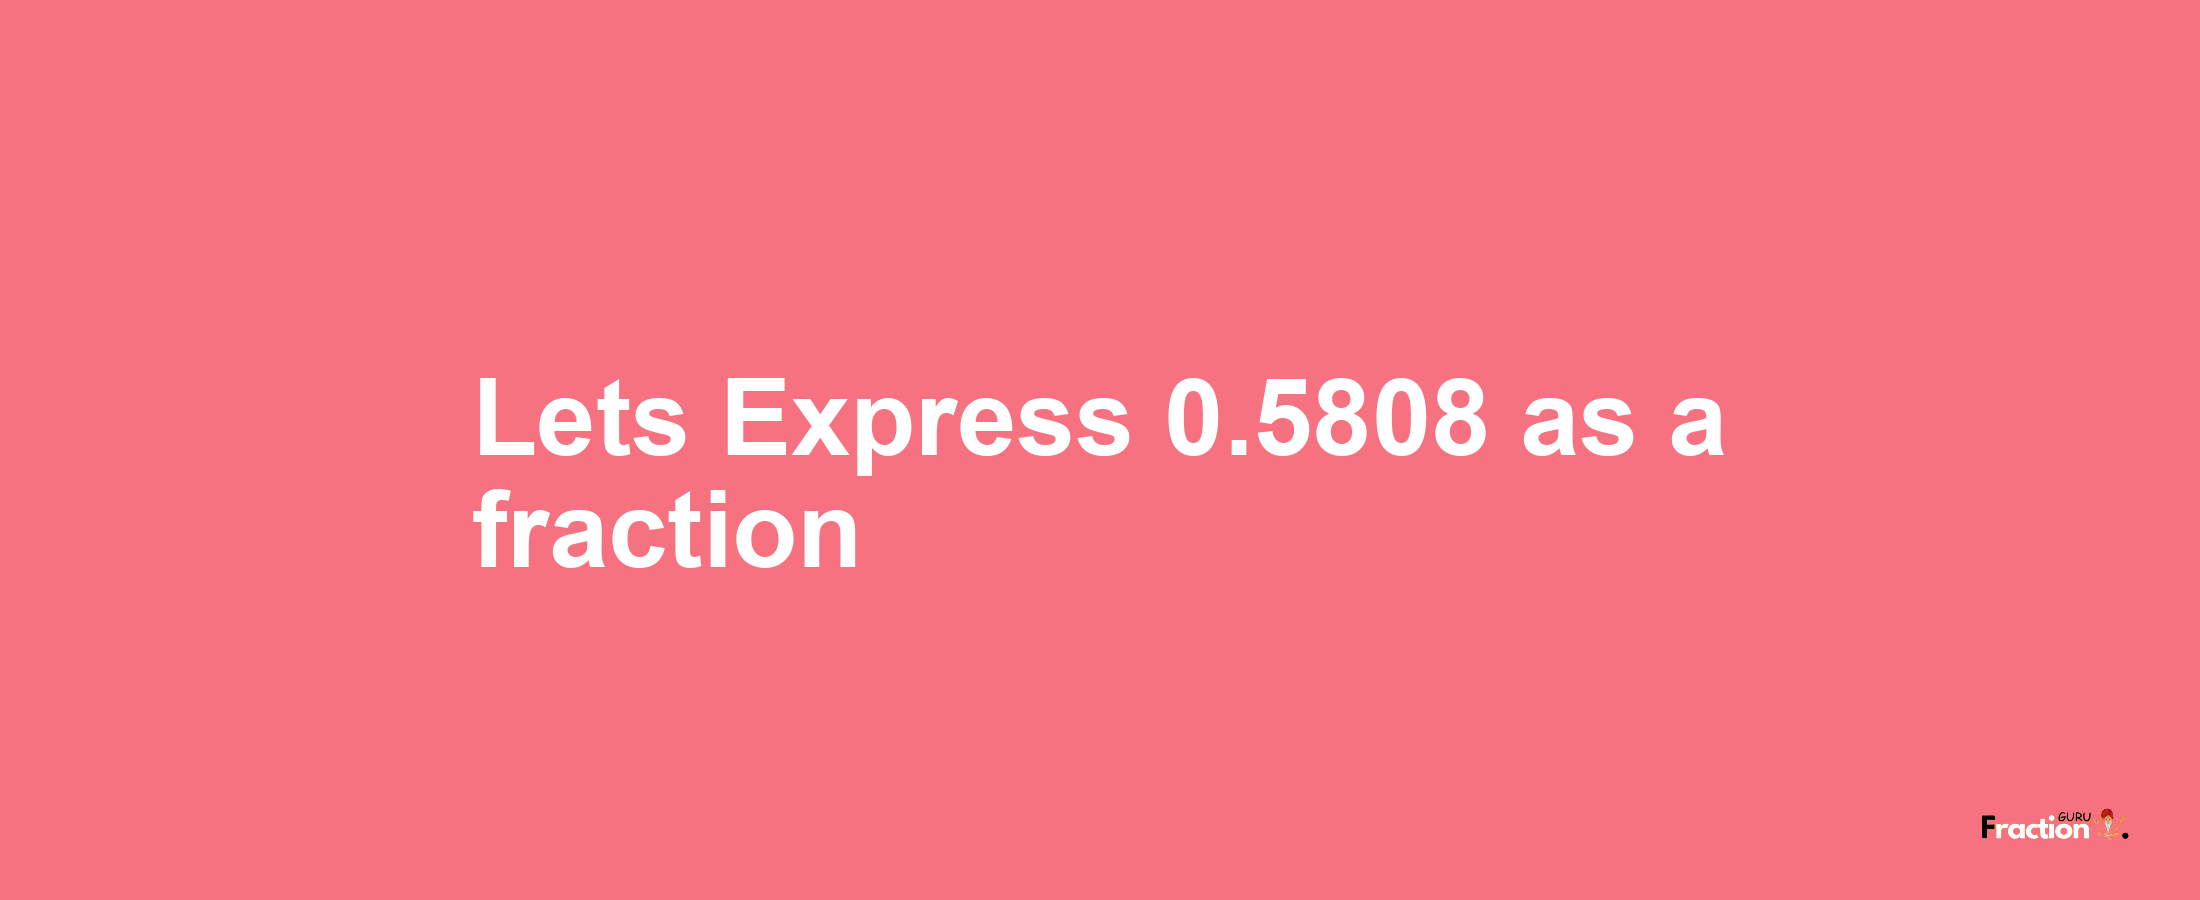 Lets Express 0.5808 as afraction